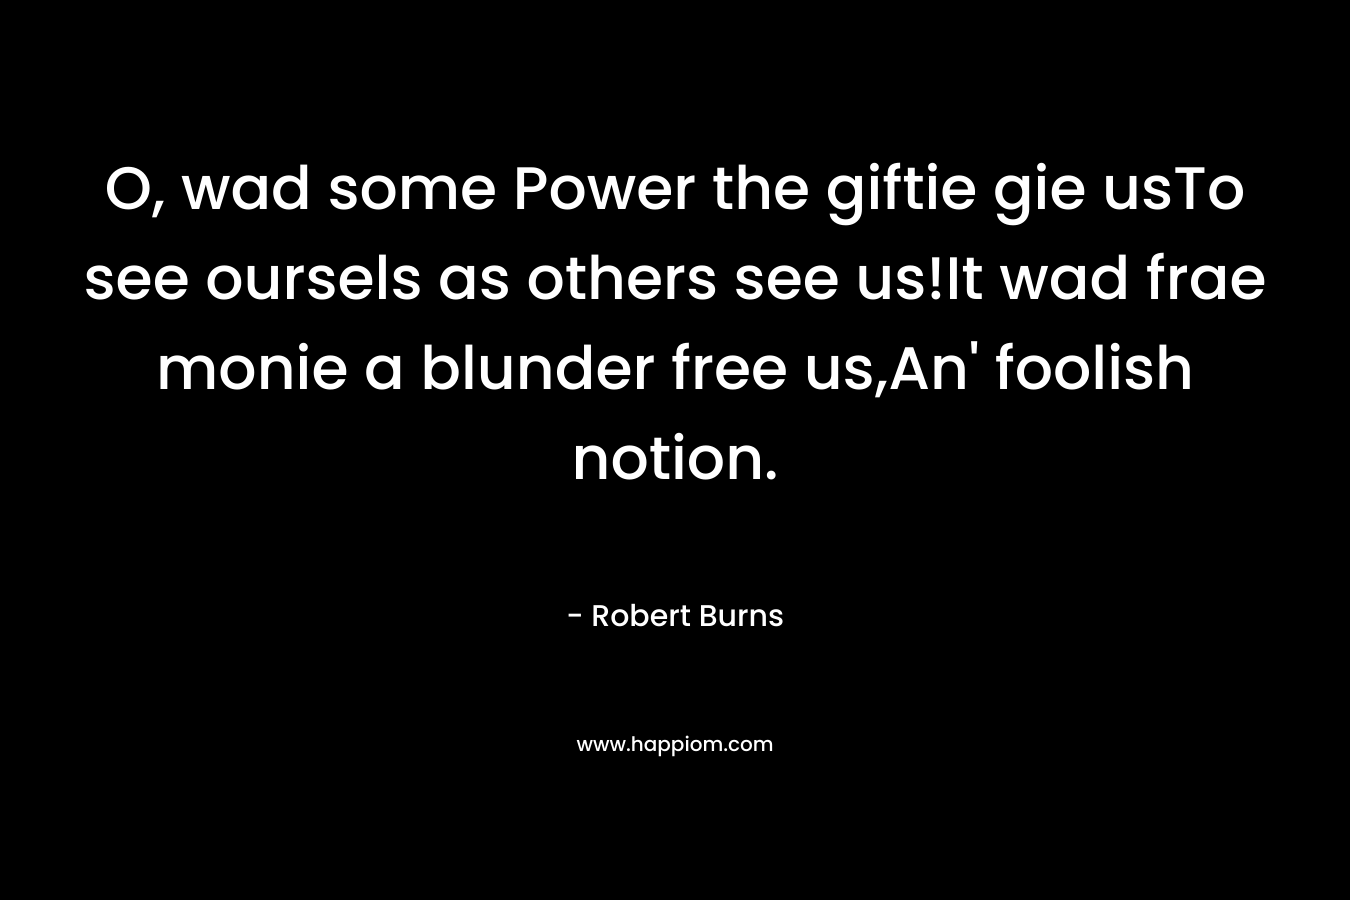 O, wad some Power the giftie gie usTo see oursels as others see us!It wad frae monie a blunder free us,An’ foolish notion. – Robert Burns